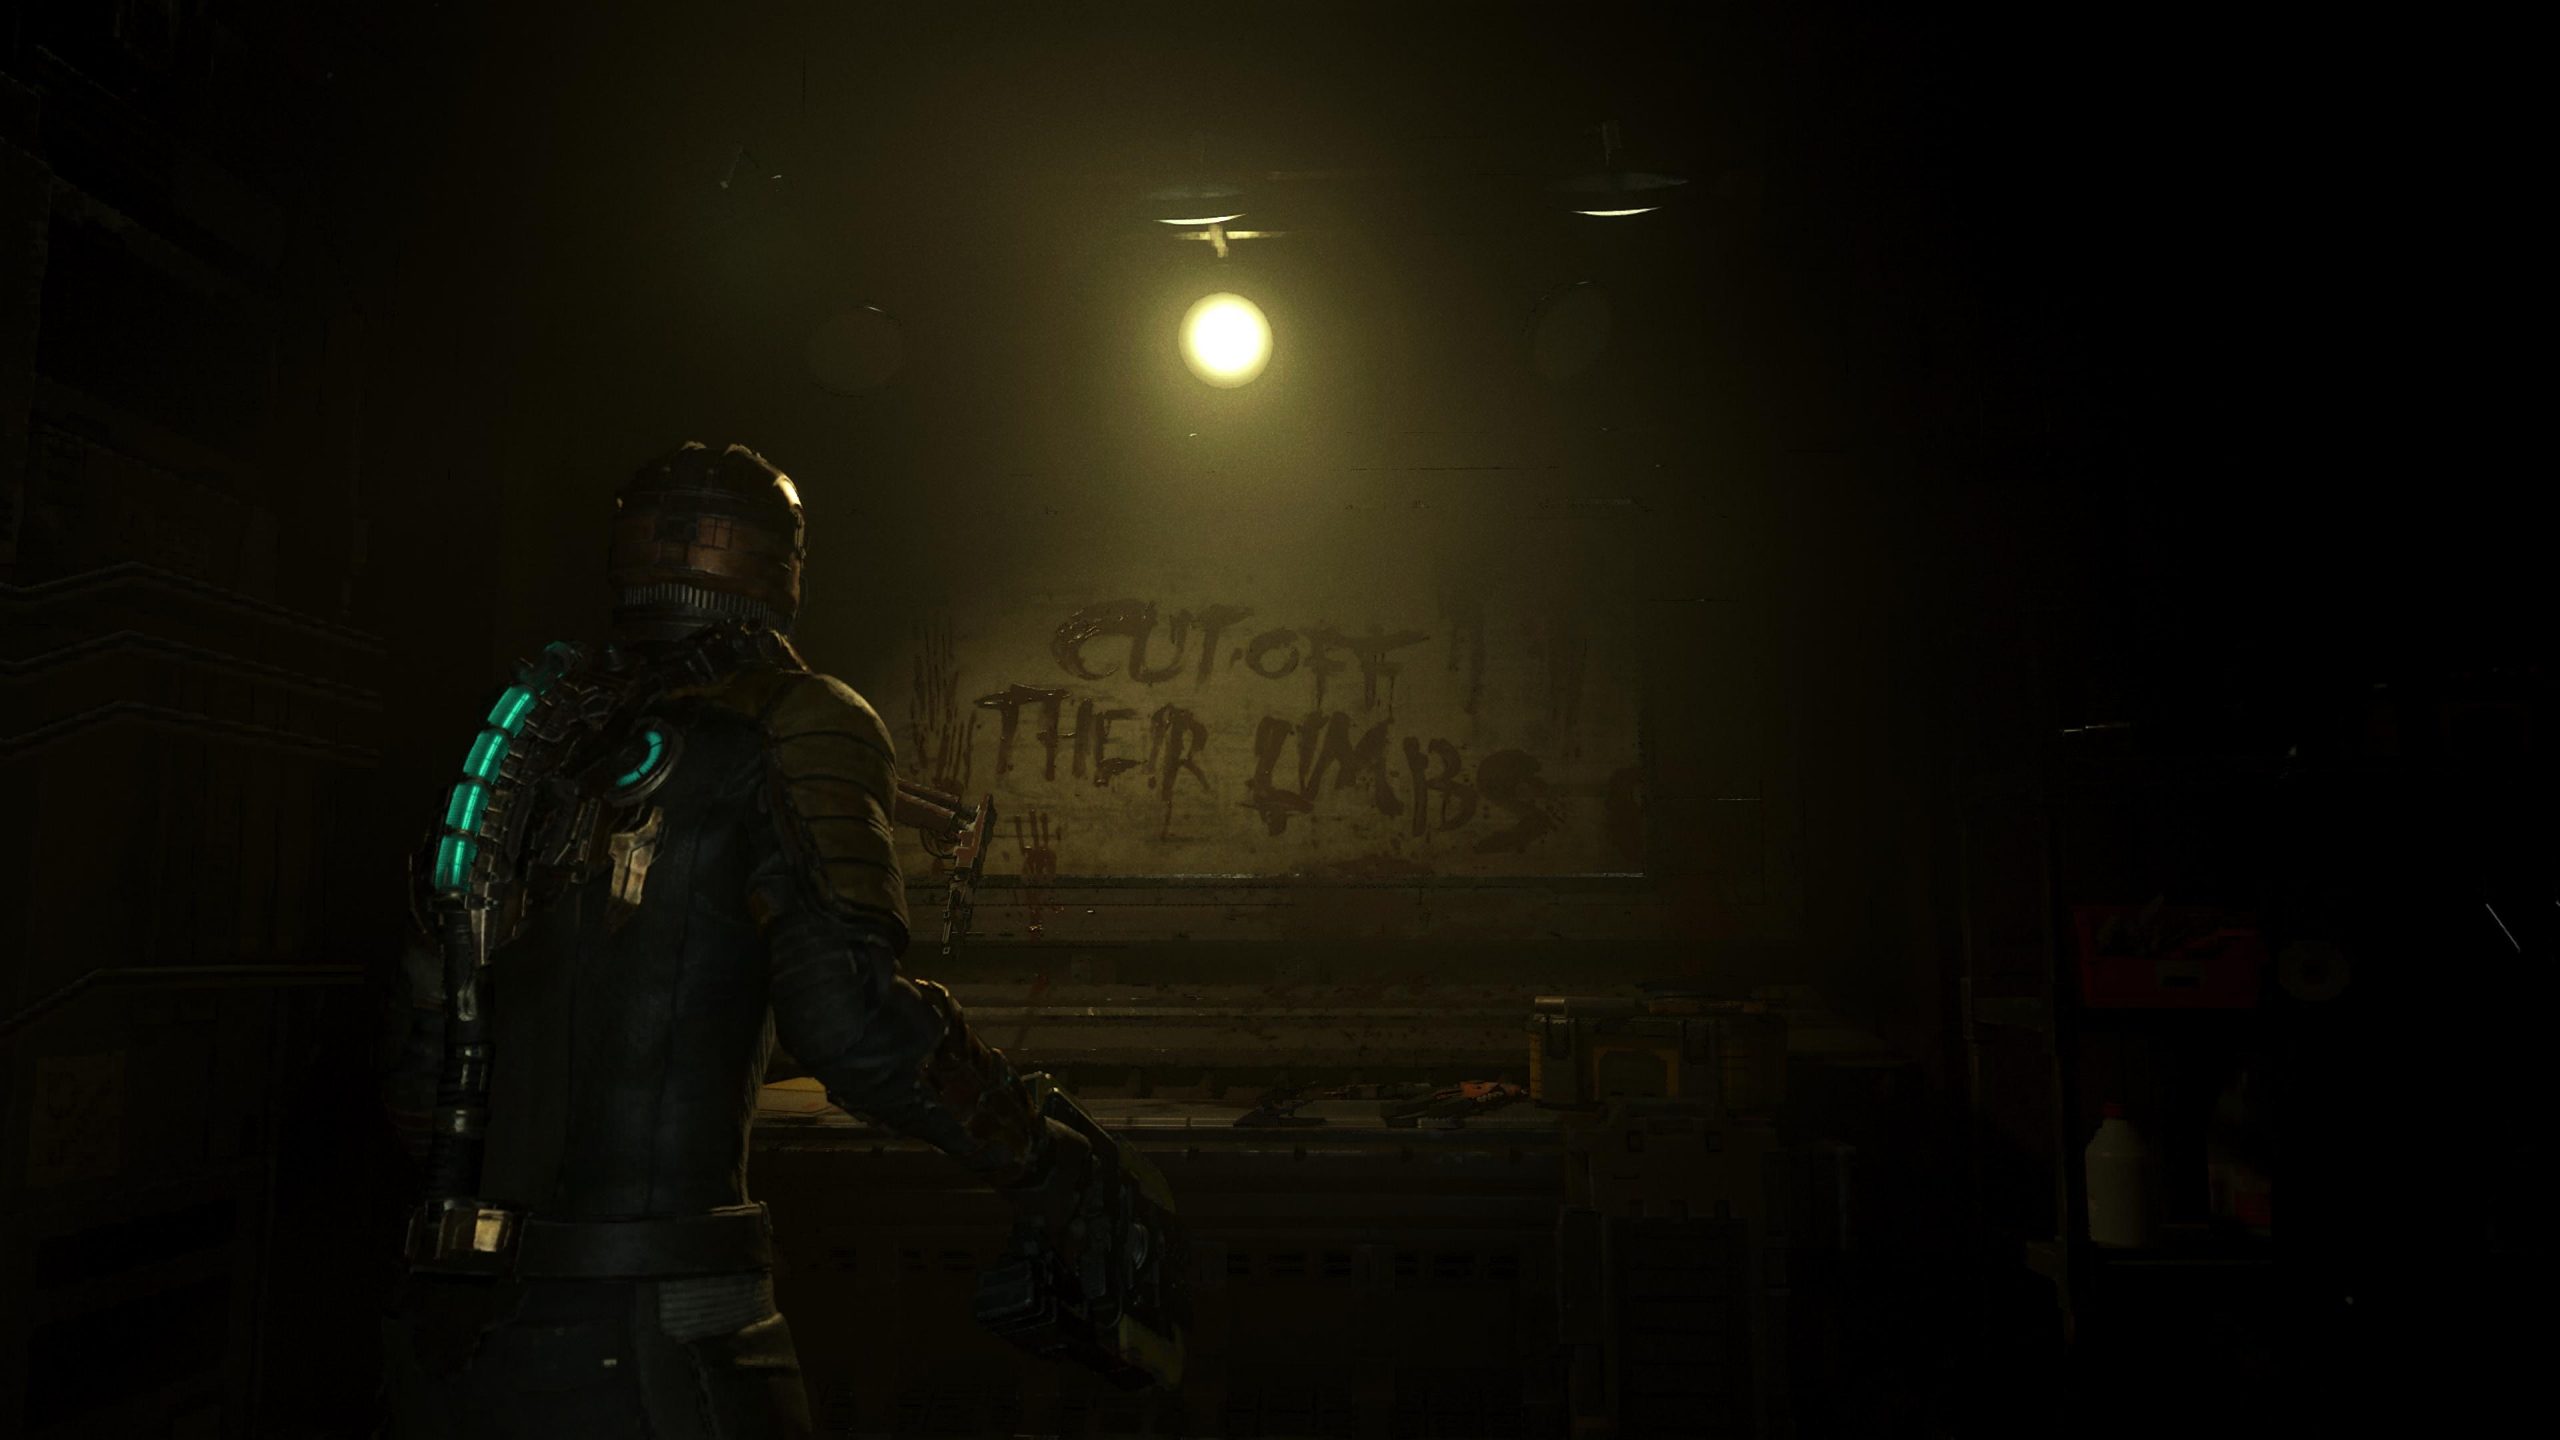 Dead Space remake 'too scary' to play at night, says developer